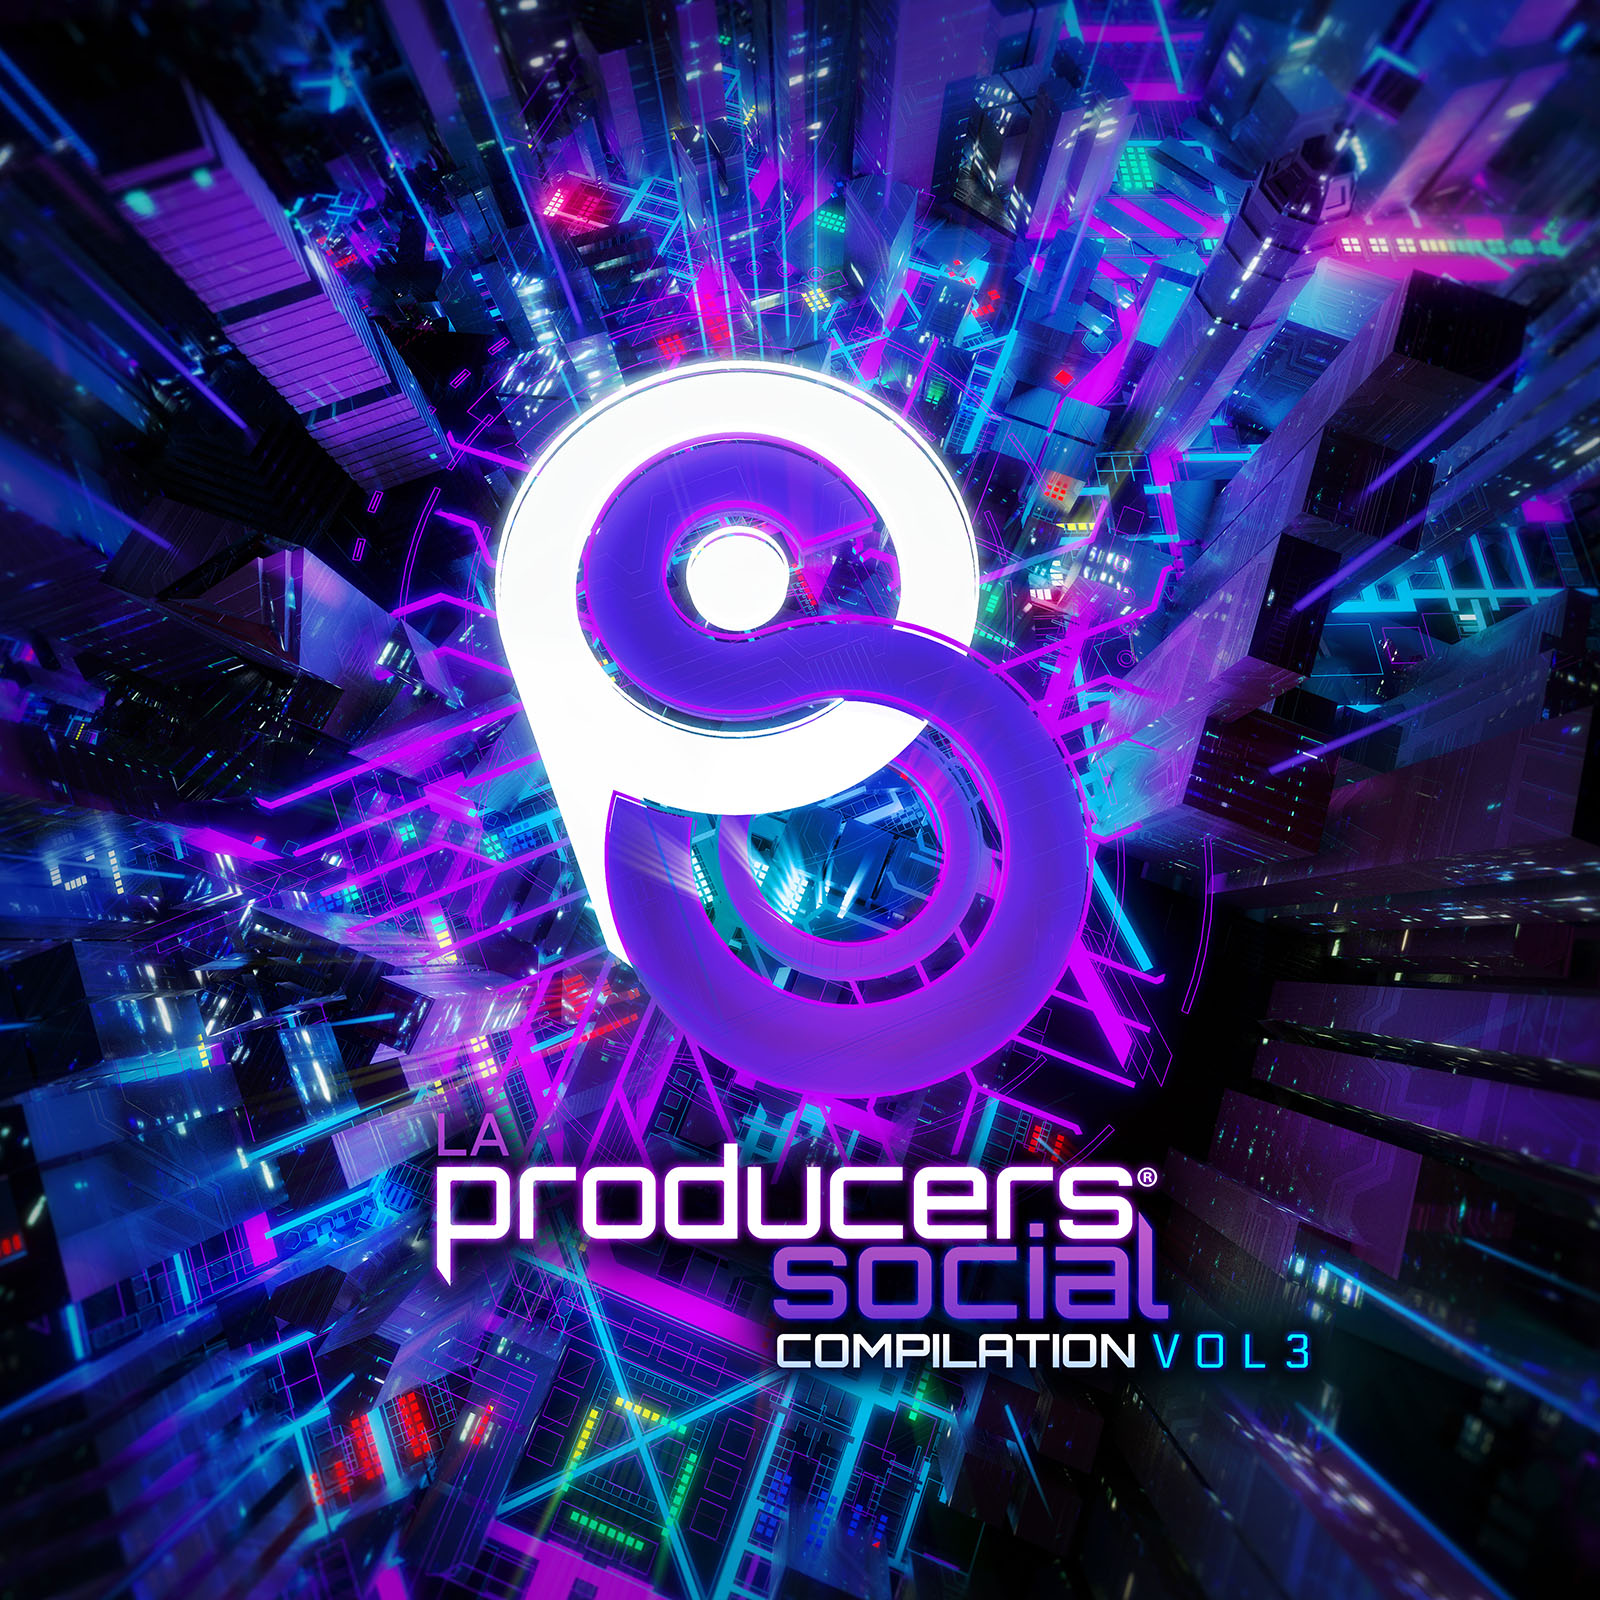 Producers Social Compilation Vol. 3 Cover Art by Axon Genesis